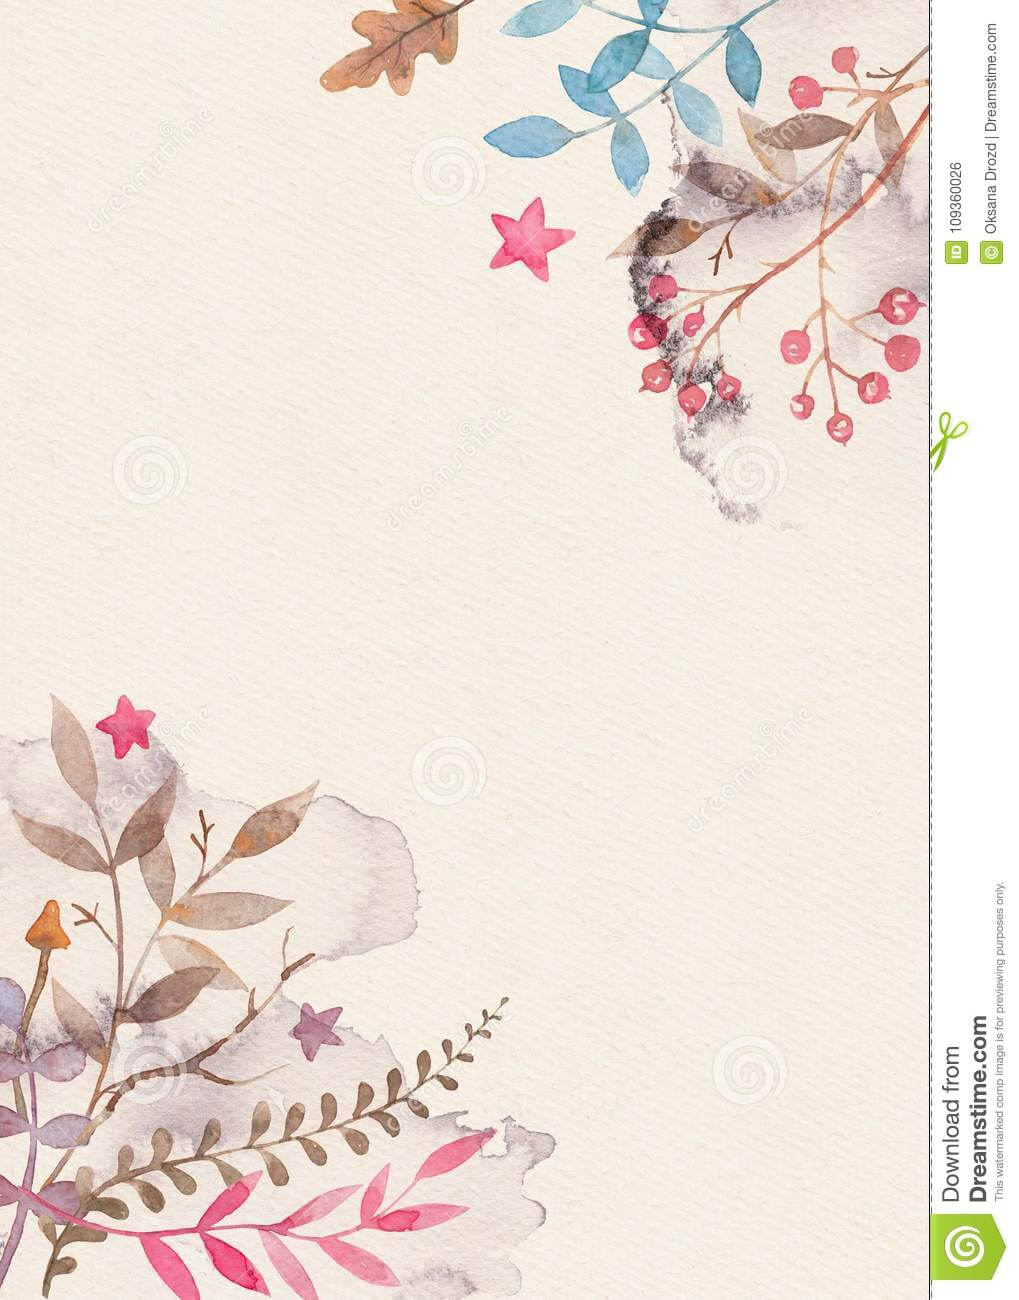 Hand Drawn Watercolor Greeting Card Template With Floral With Greeting Card Layout Templates